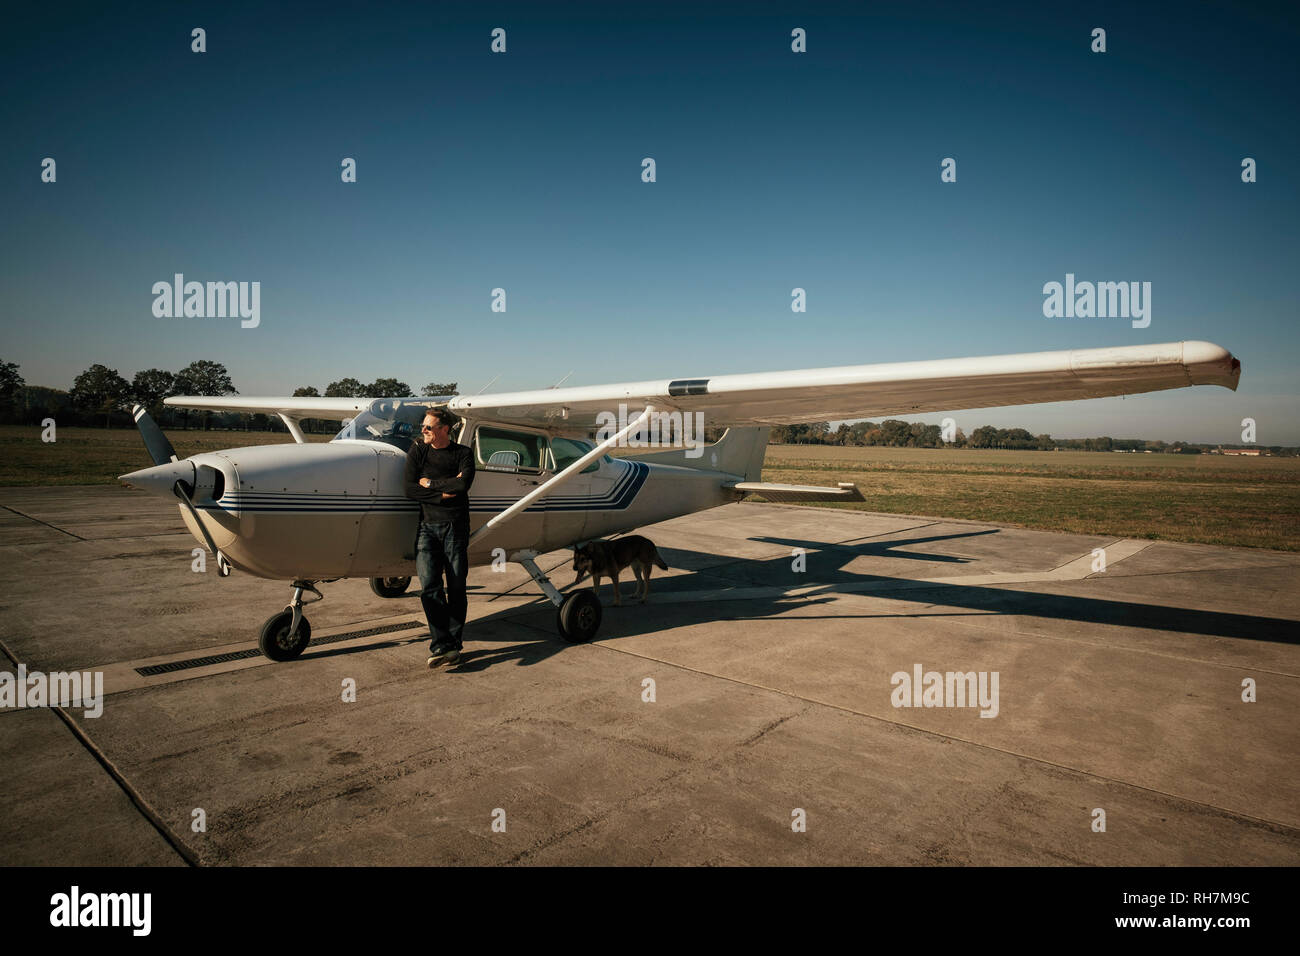 Male pilot standing at small propellor airplane on sunny tarmac Stock Photo